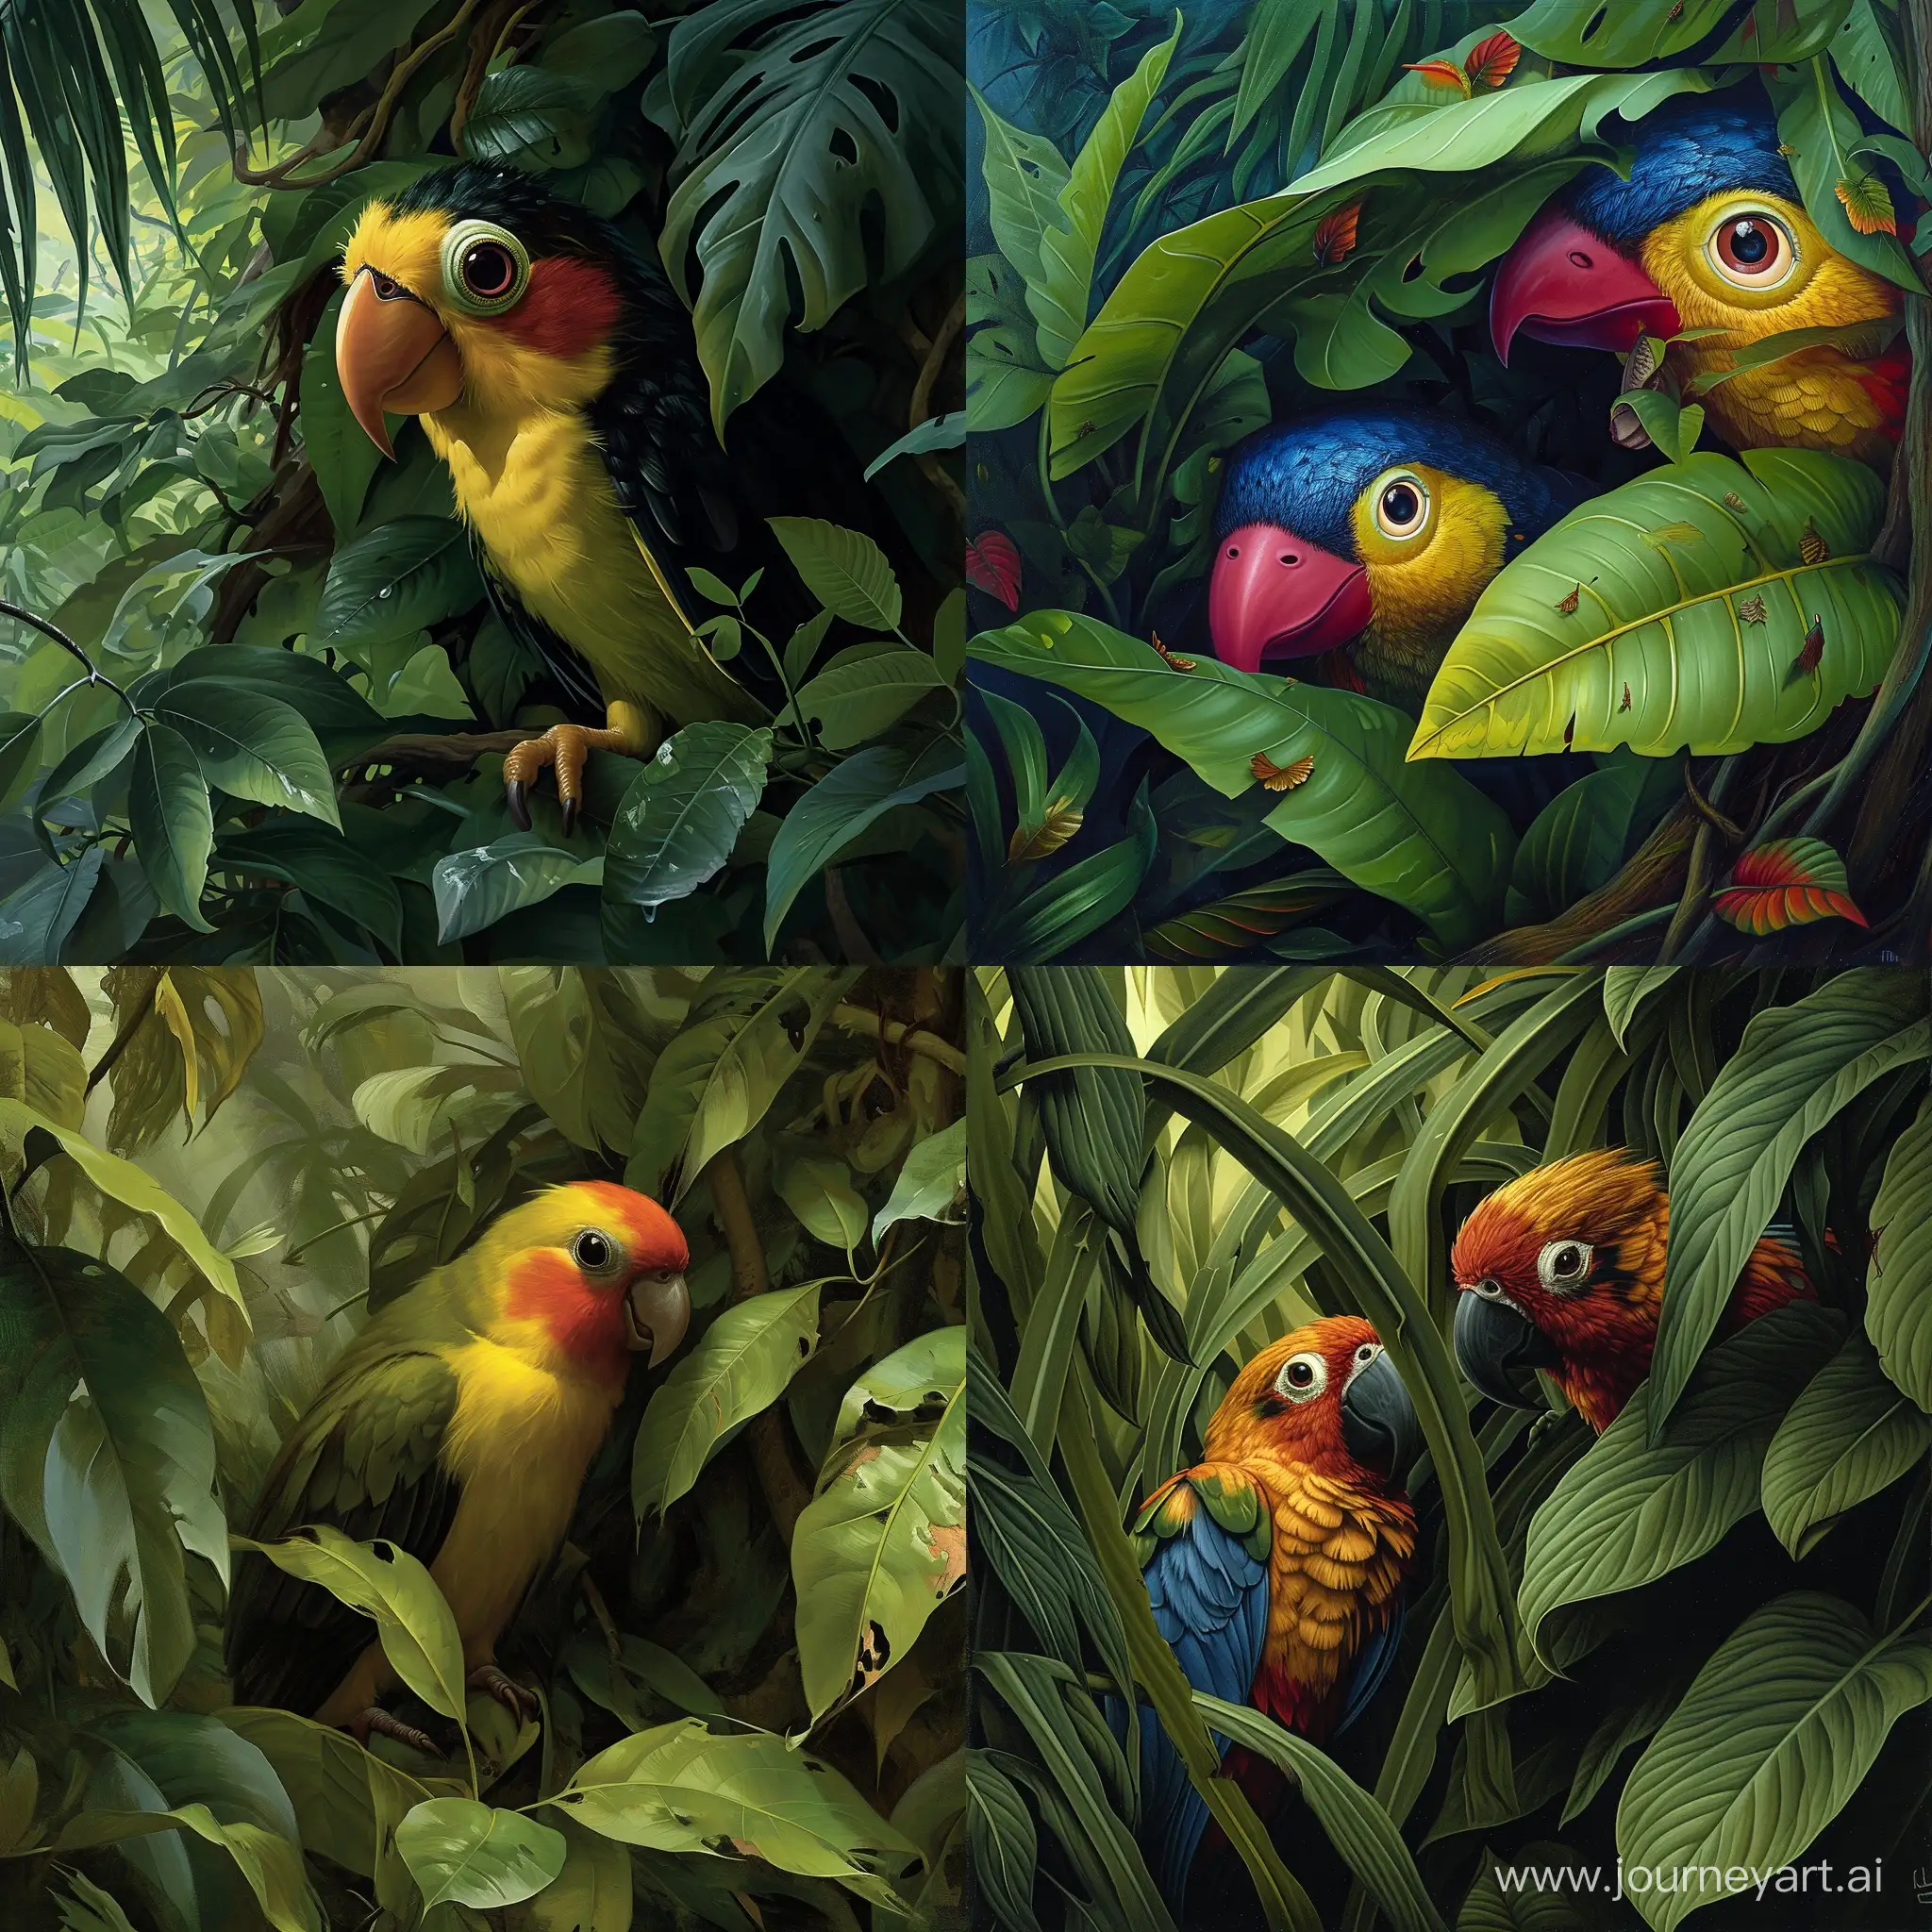 tropical birds in the jungle hiding behind leafes, in the style of realistic fantasy artwork, tim burton, brian froud, alex alemany, mark keathley, wandering eye, wimmelbilder,painted illustrations